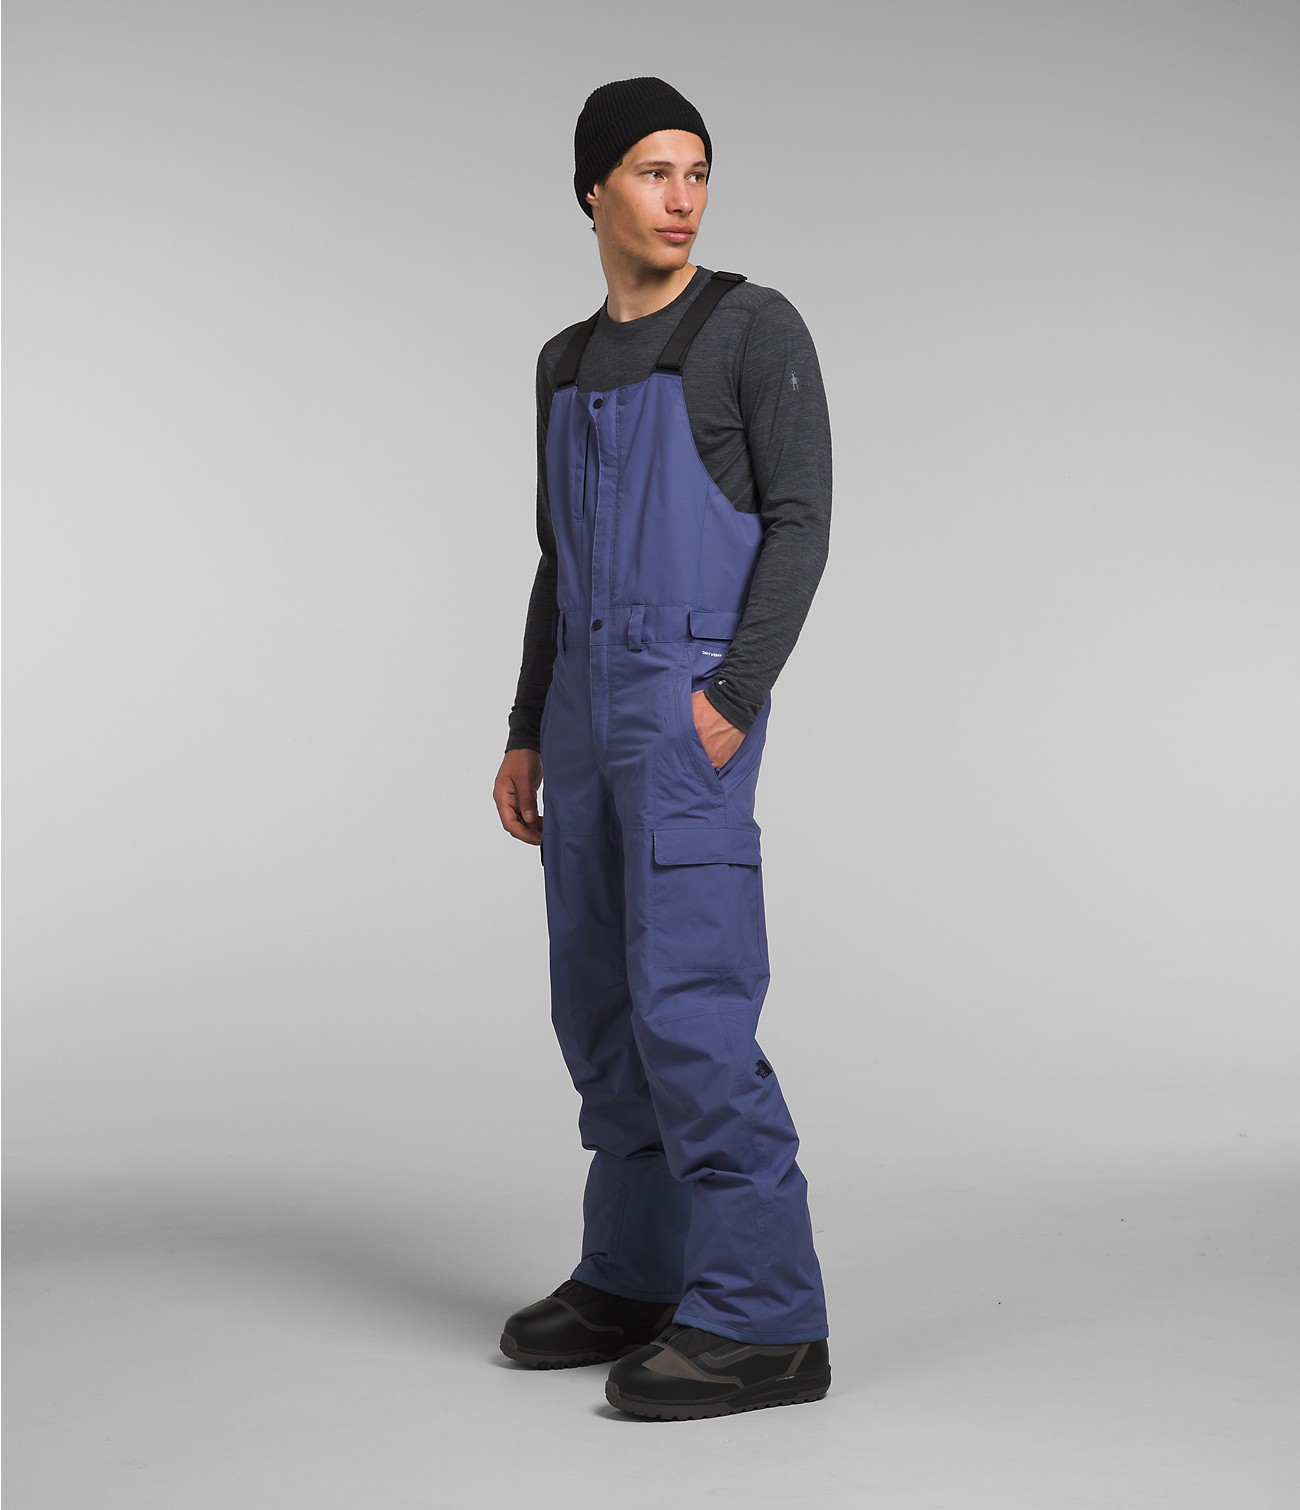 Men’s Freedom Bibs | The North Face